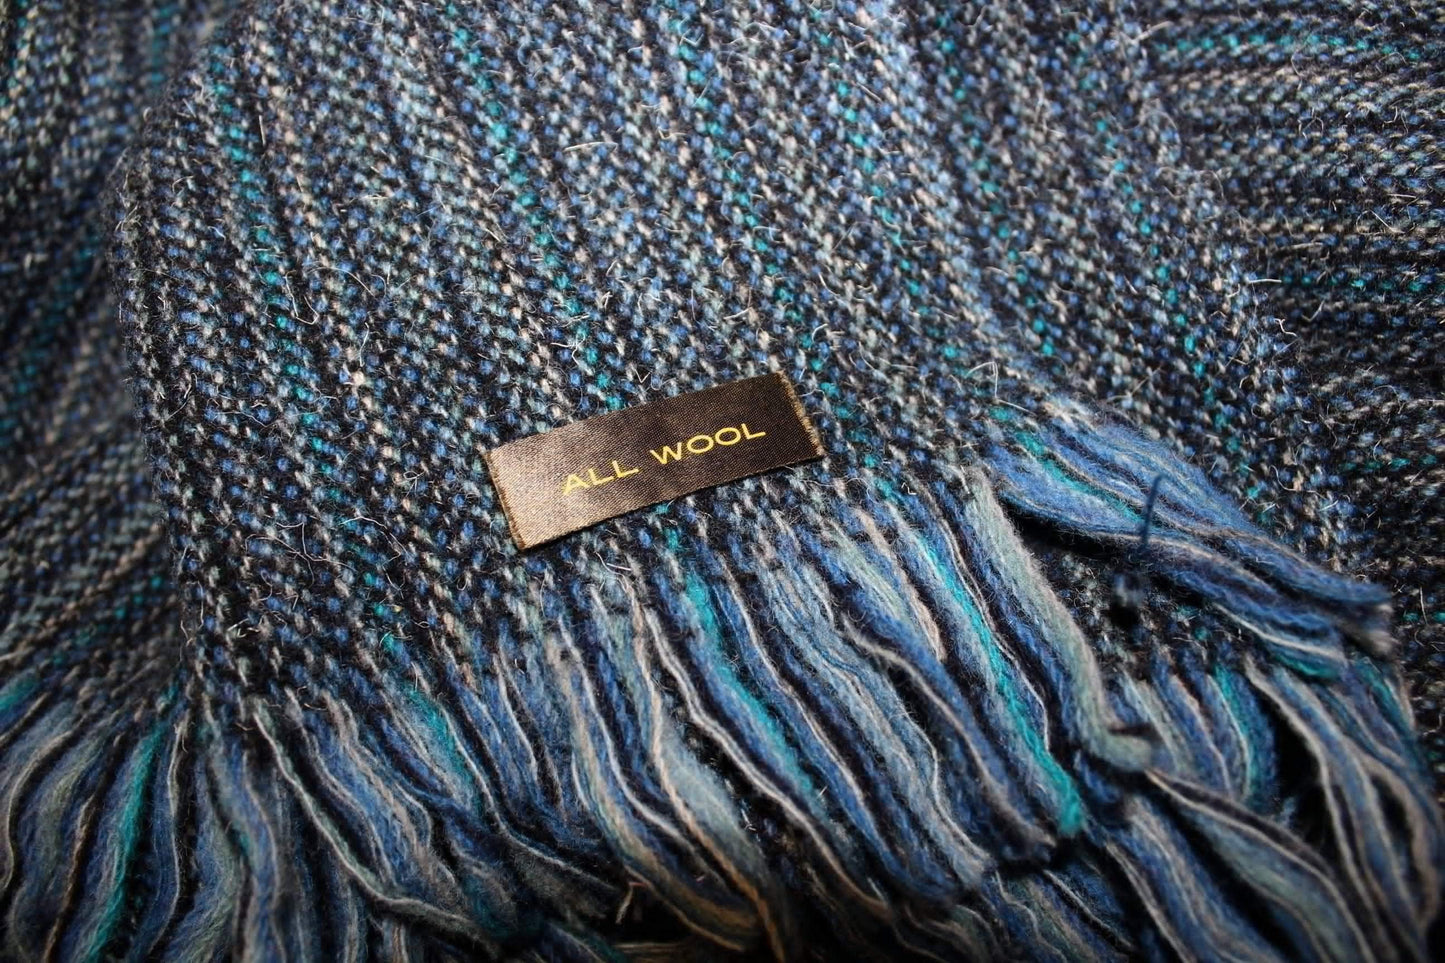 Handsome Wool Throw Blanket Shades of Blue Mixed Linear Woven Fiber 61" X 64" + Fringe fiber tag